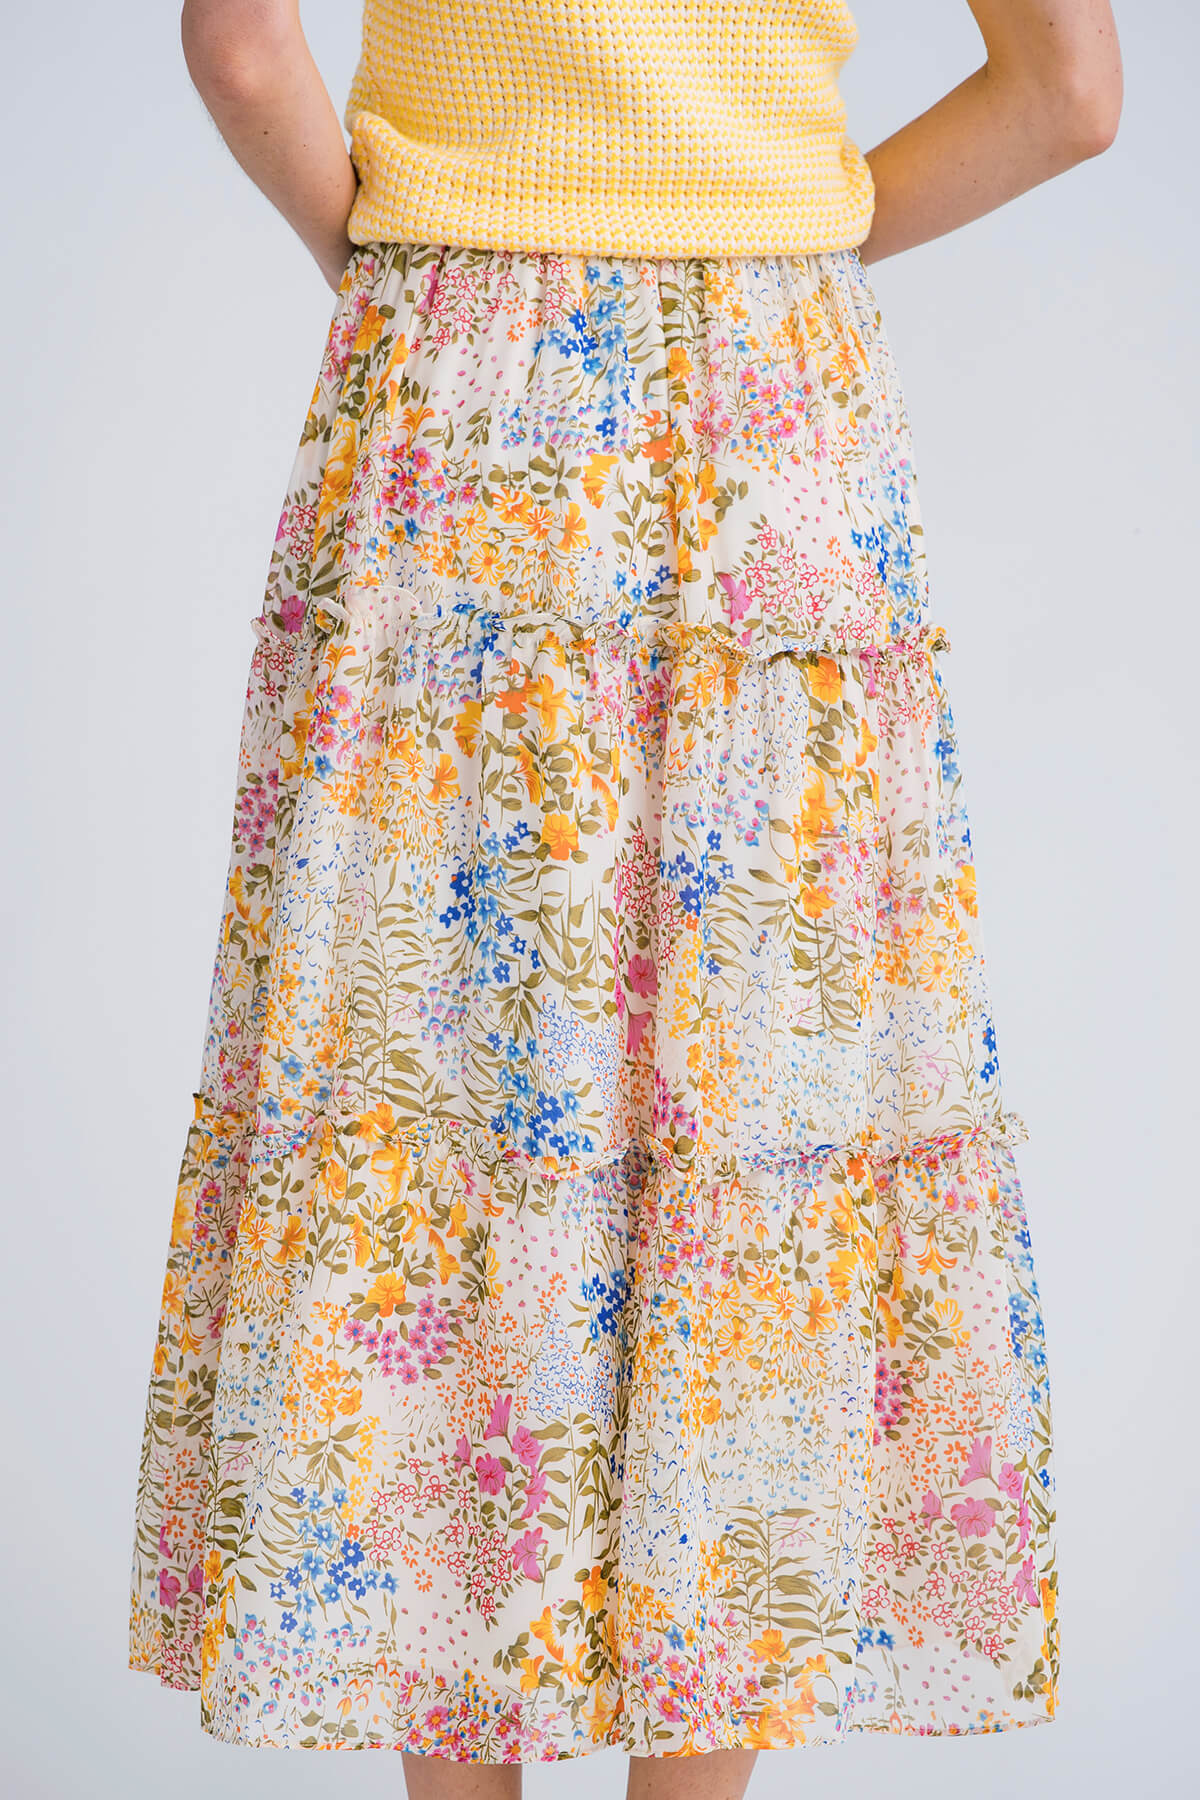 Lucy Paris Evelyn Floral Skirt